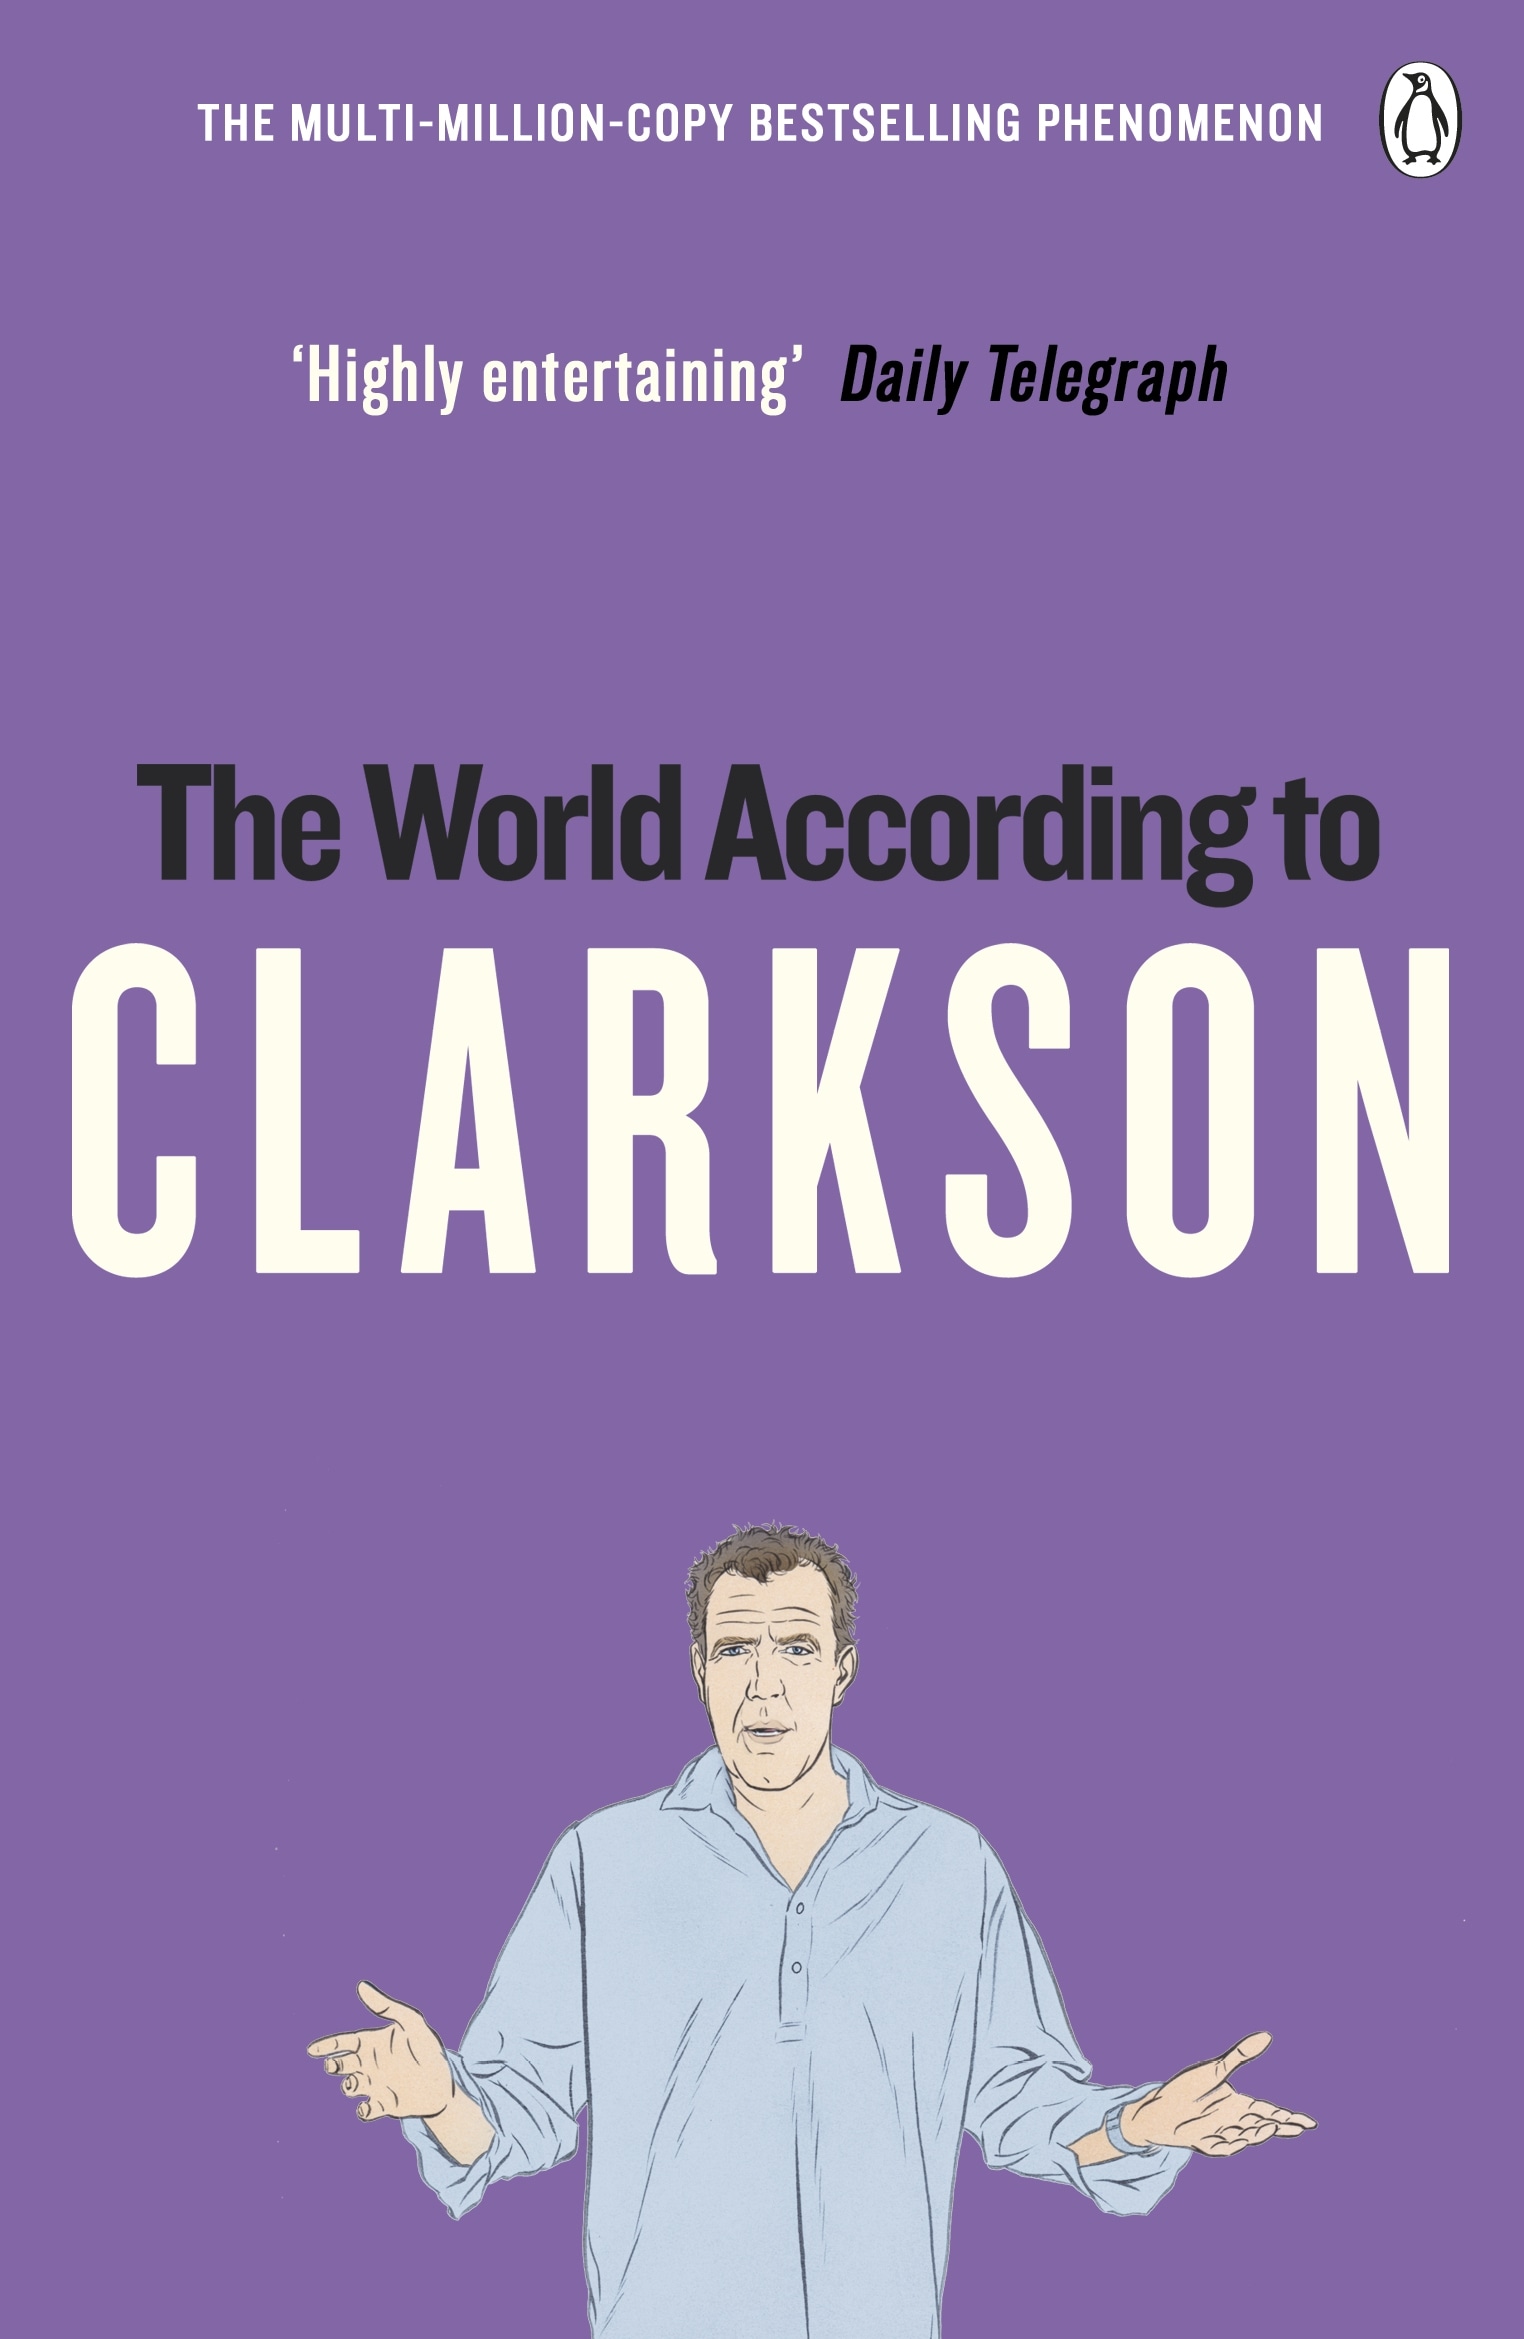 Book “The World According to Clarkson” by Jeremy Clarkson